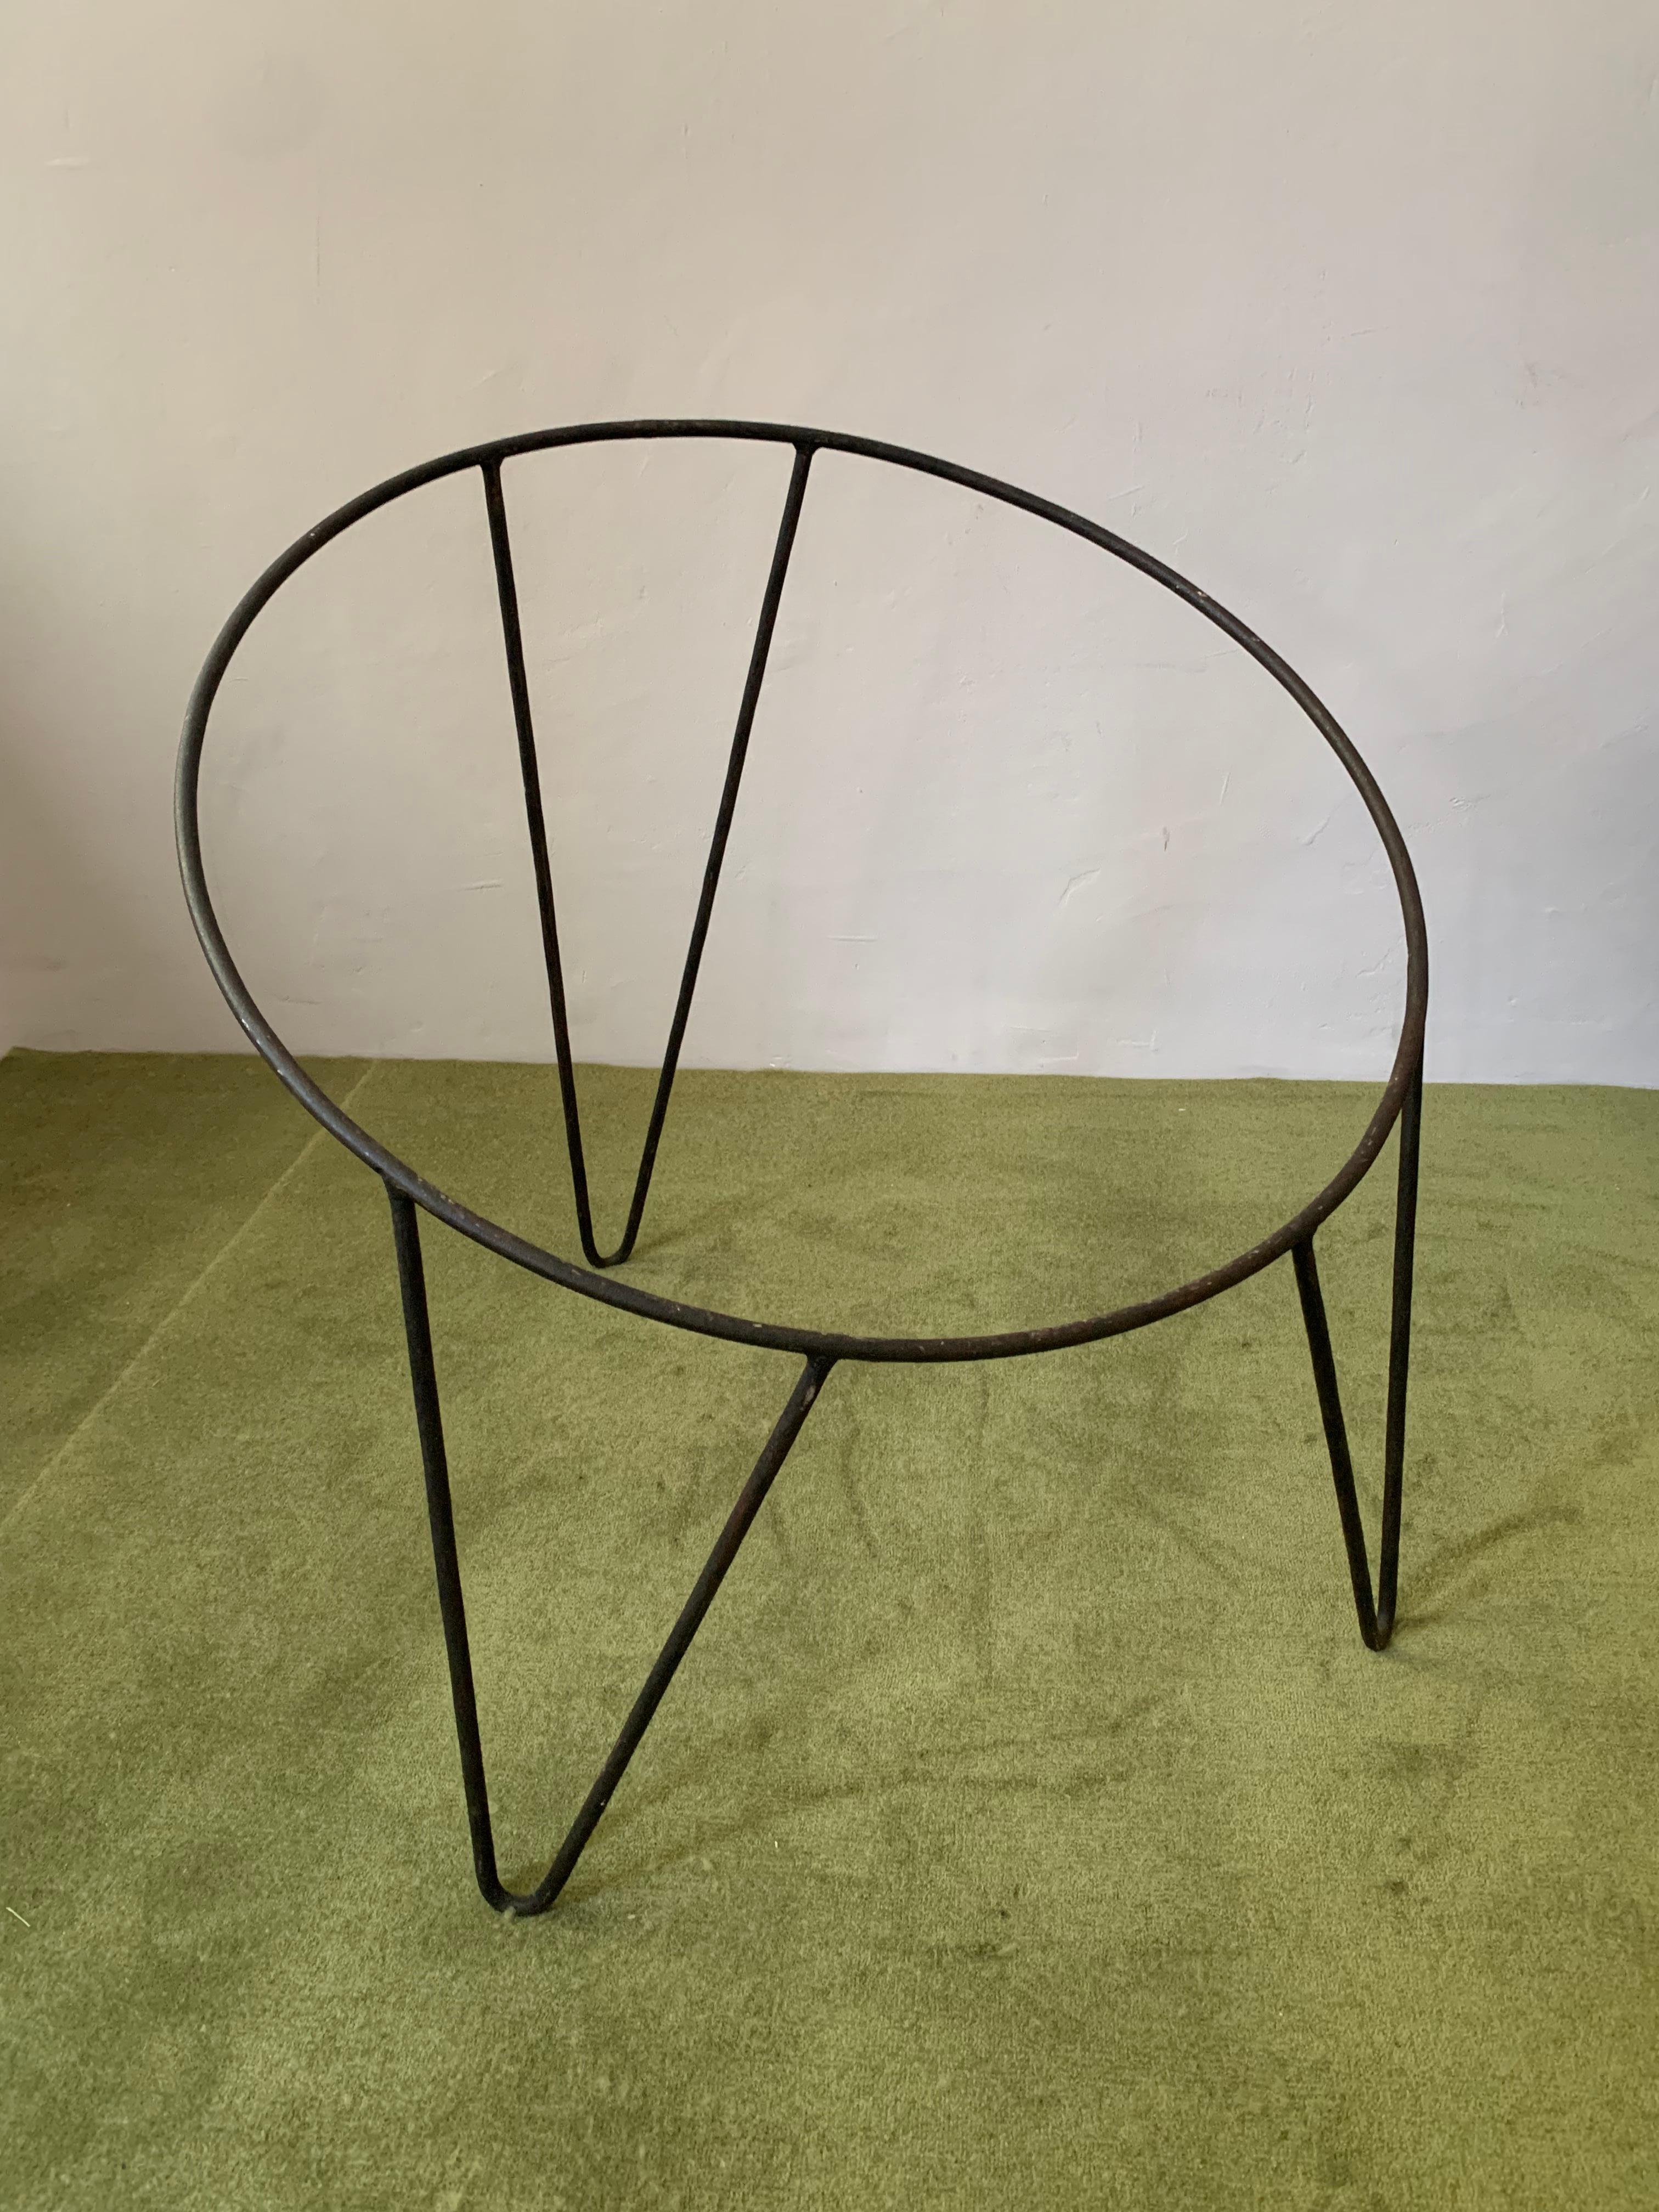 Cone Chair by Sir Terence Conran 1950's  For Sale 4